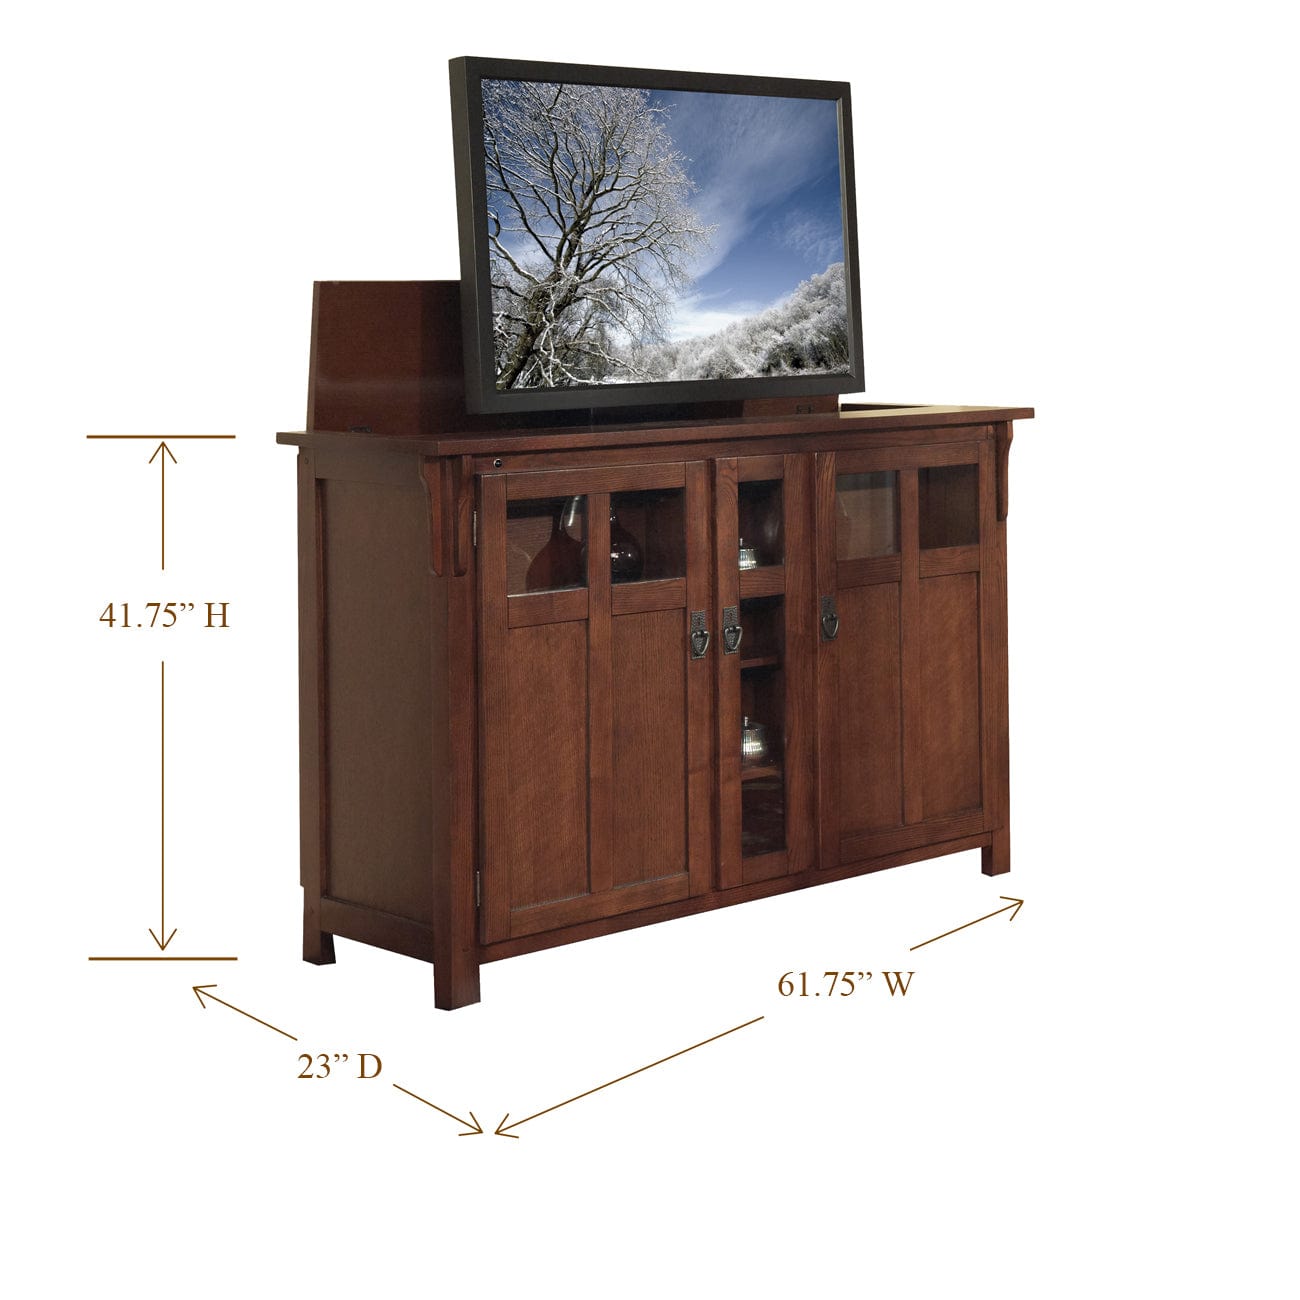 The Bungalow 70062 TV Lift Cabinet for 60 inch Flat screen TVs measurements. 